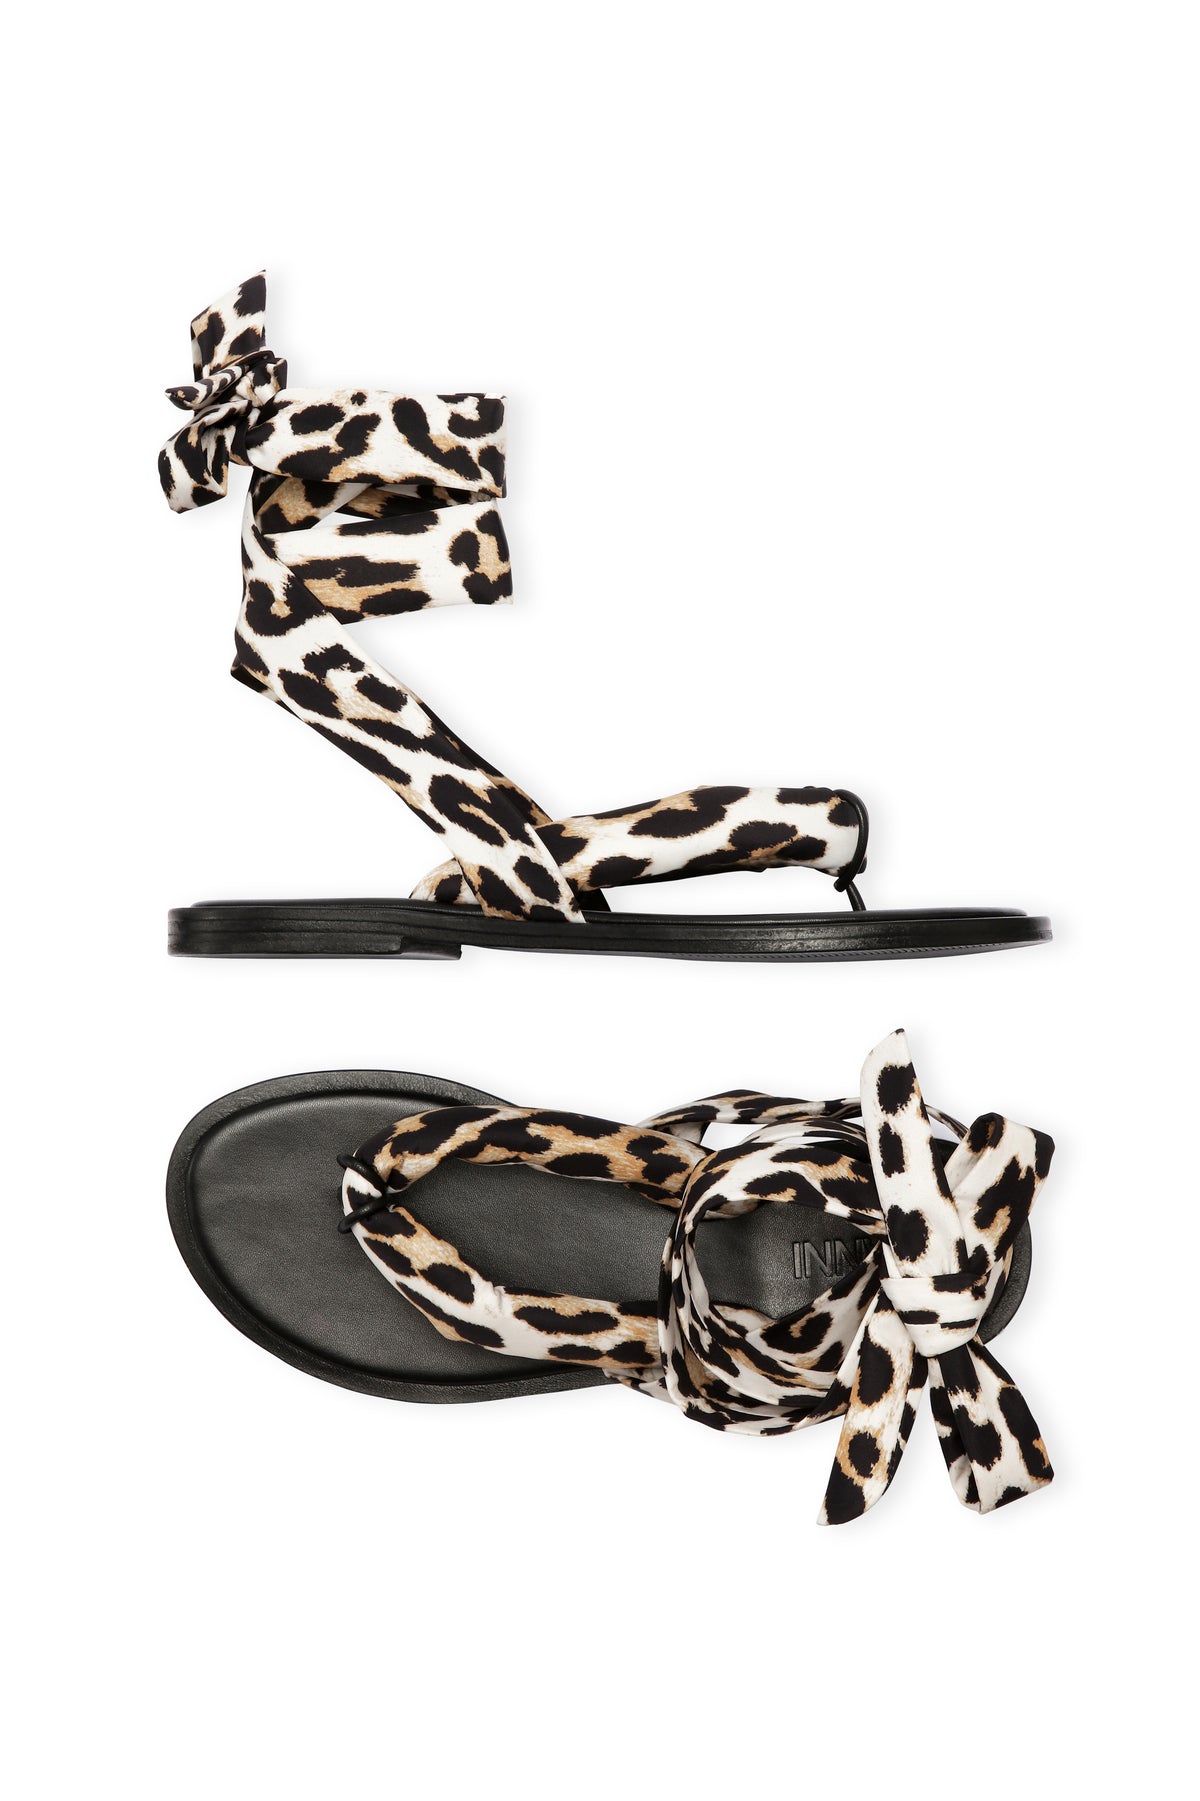 GANNI S1558 Recycled Tech Fabric Sandals in Leopard